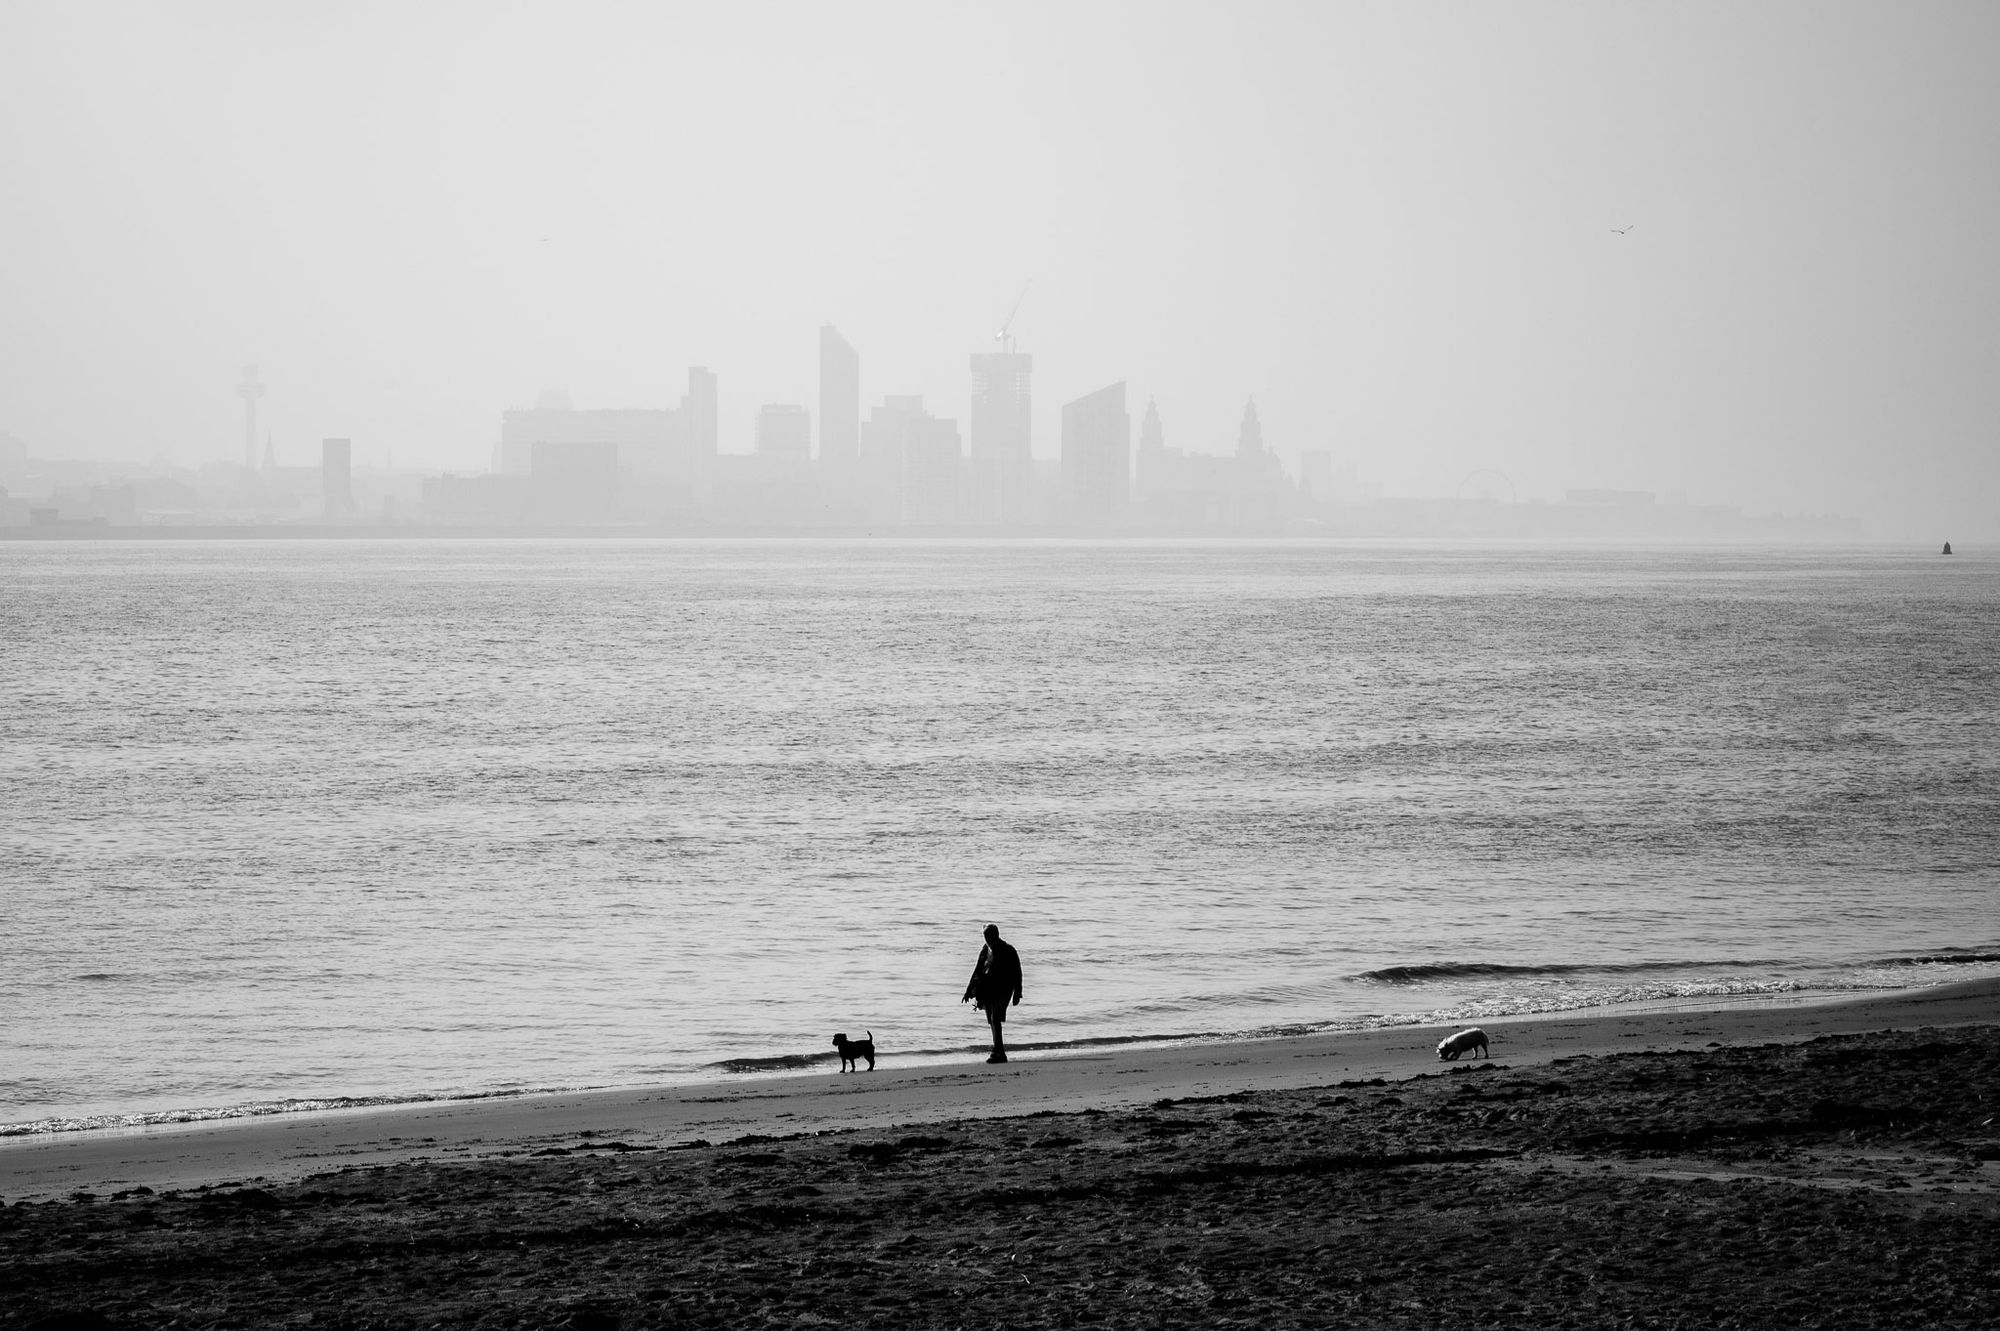 A man walks his dog along the water's edge of the River Mersey. In the background is the Liverpool skyline.